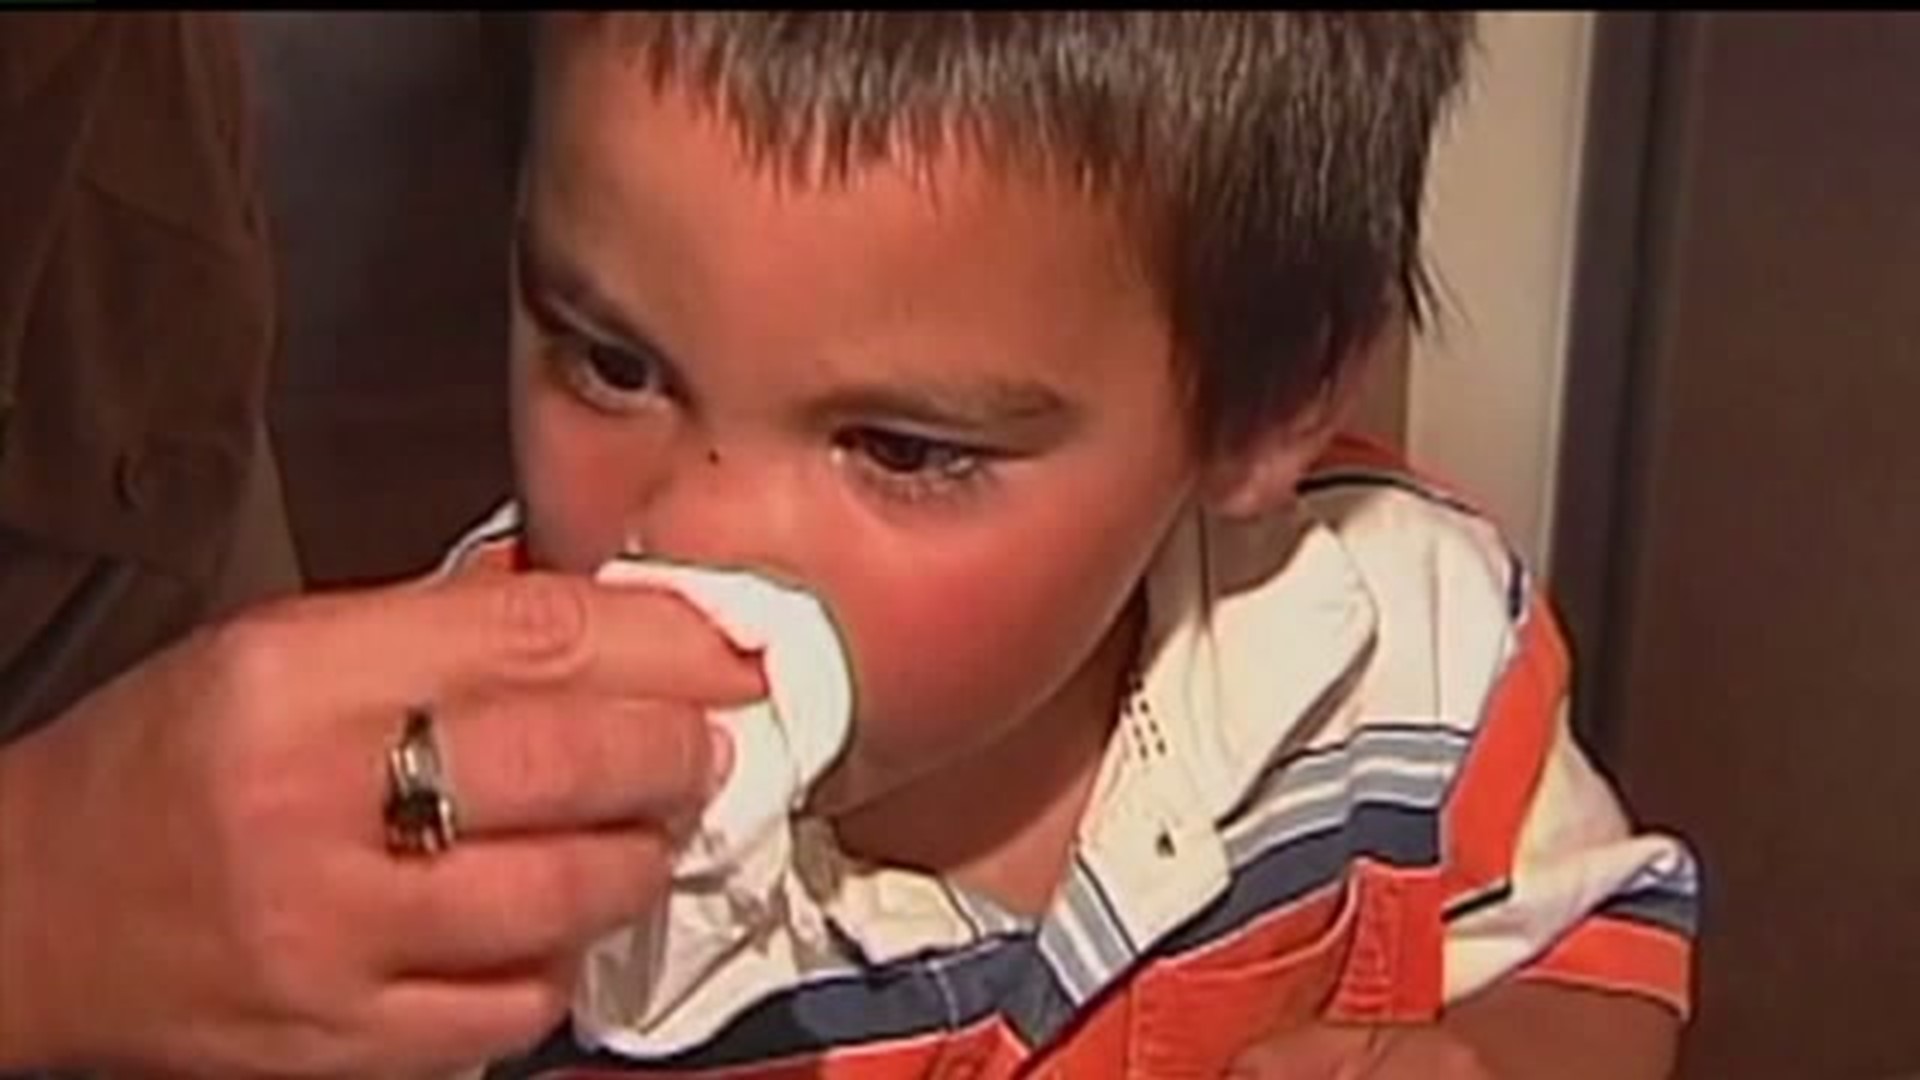 How to treat allergies in kids